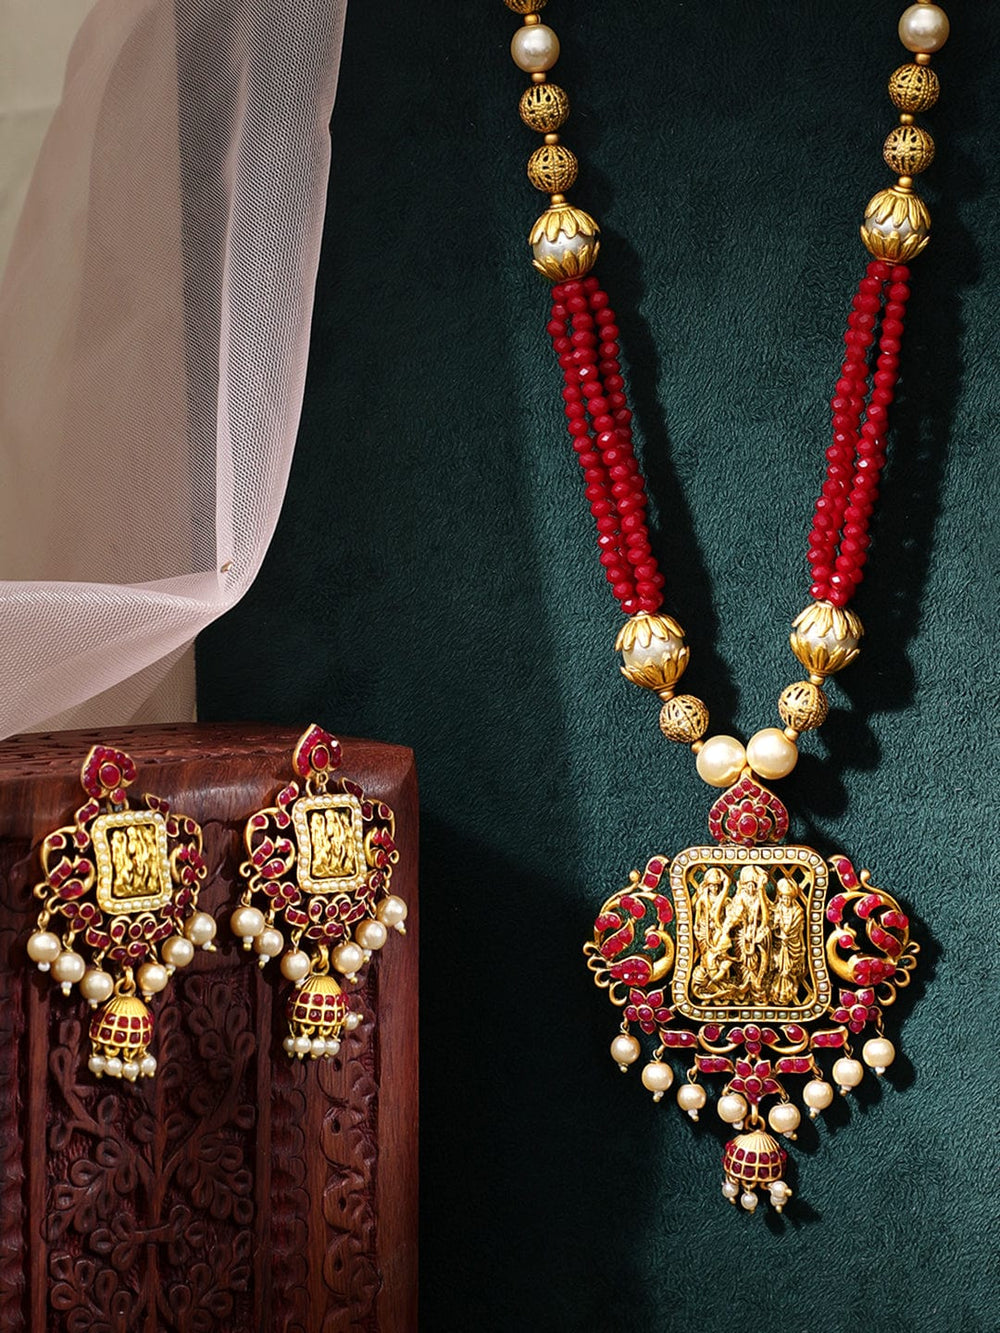 Gold Plated Maroon Red Necklace Set Necklace Set